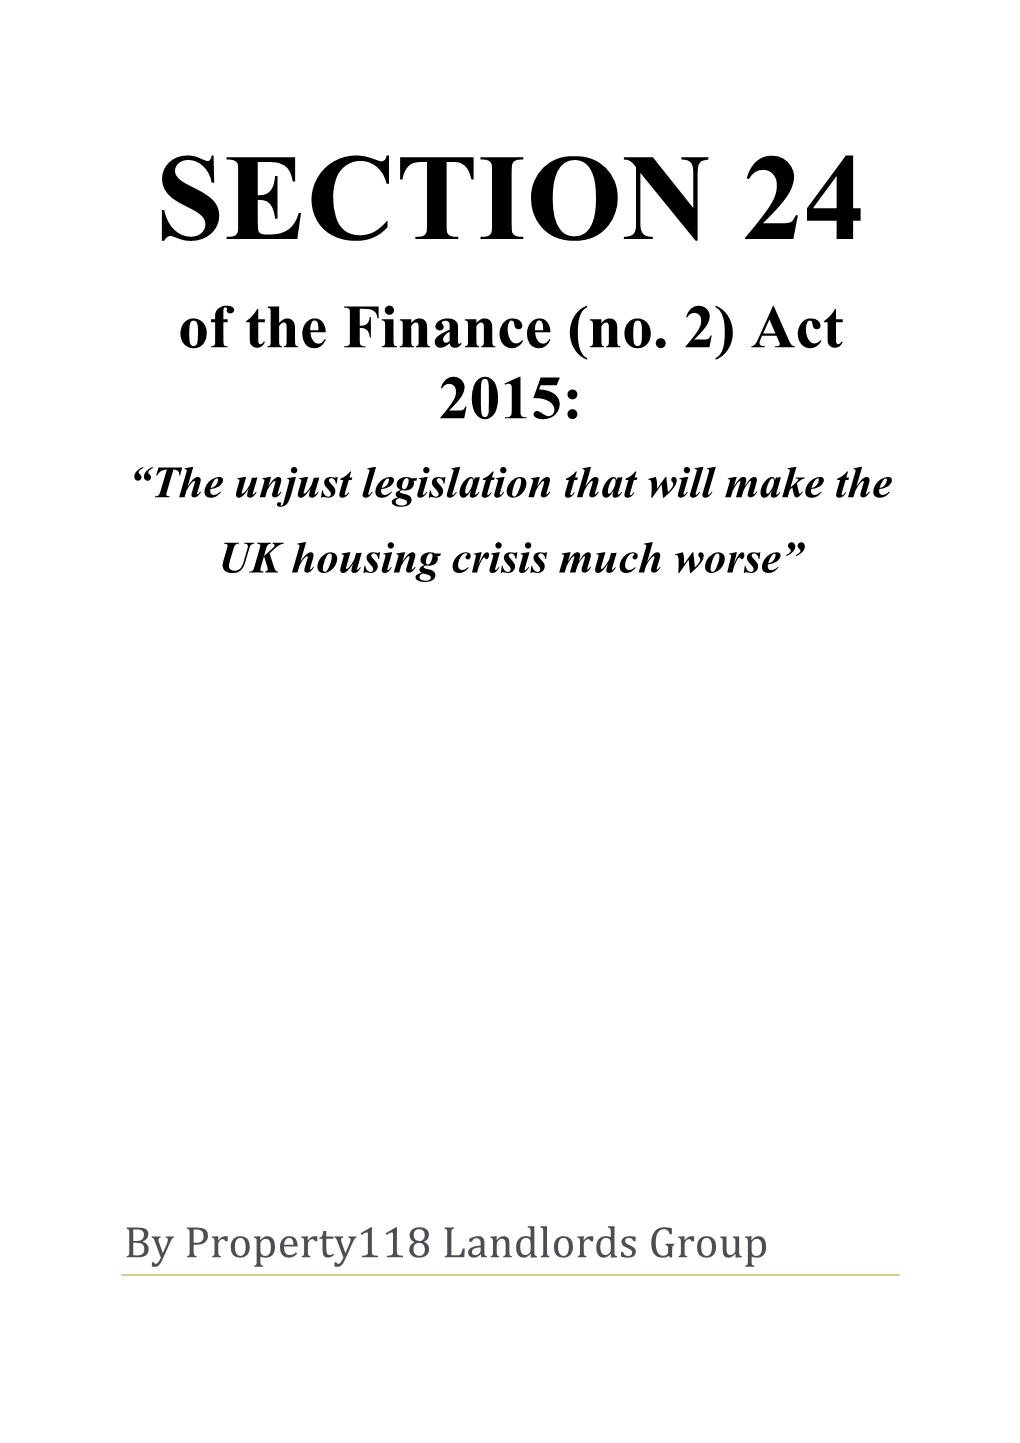 SECTION 24 of the Finance (No